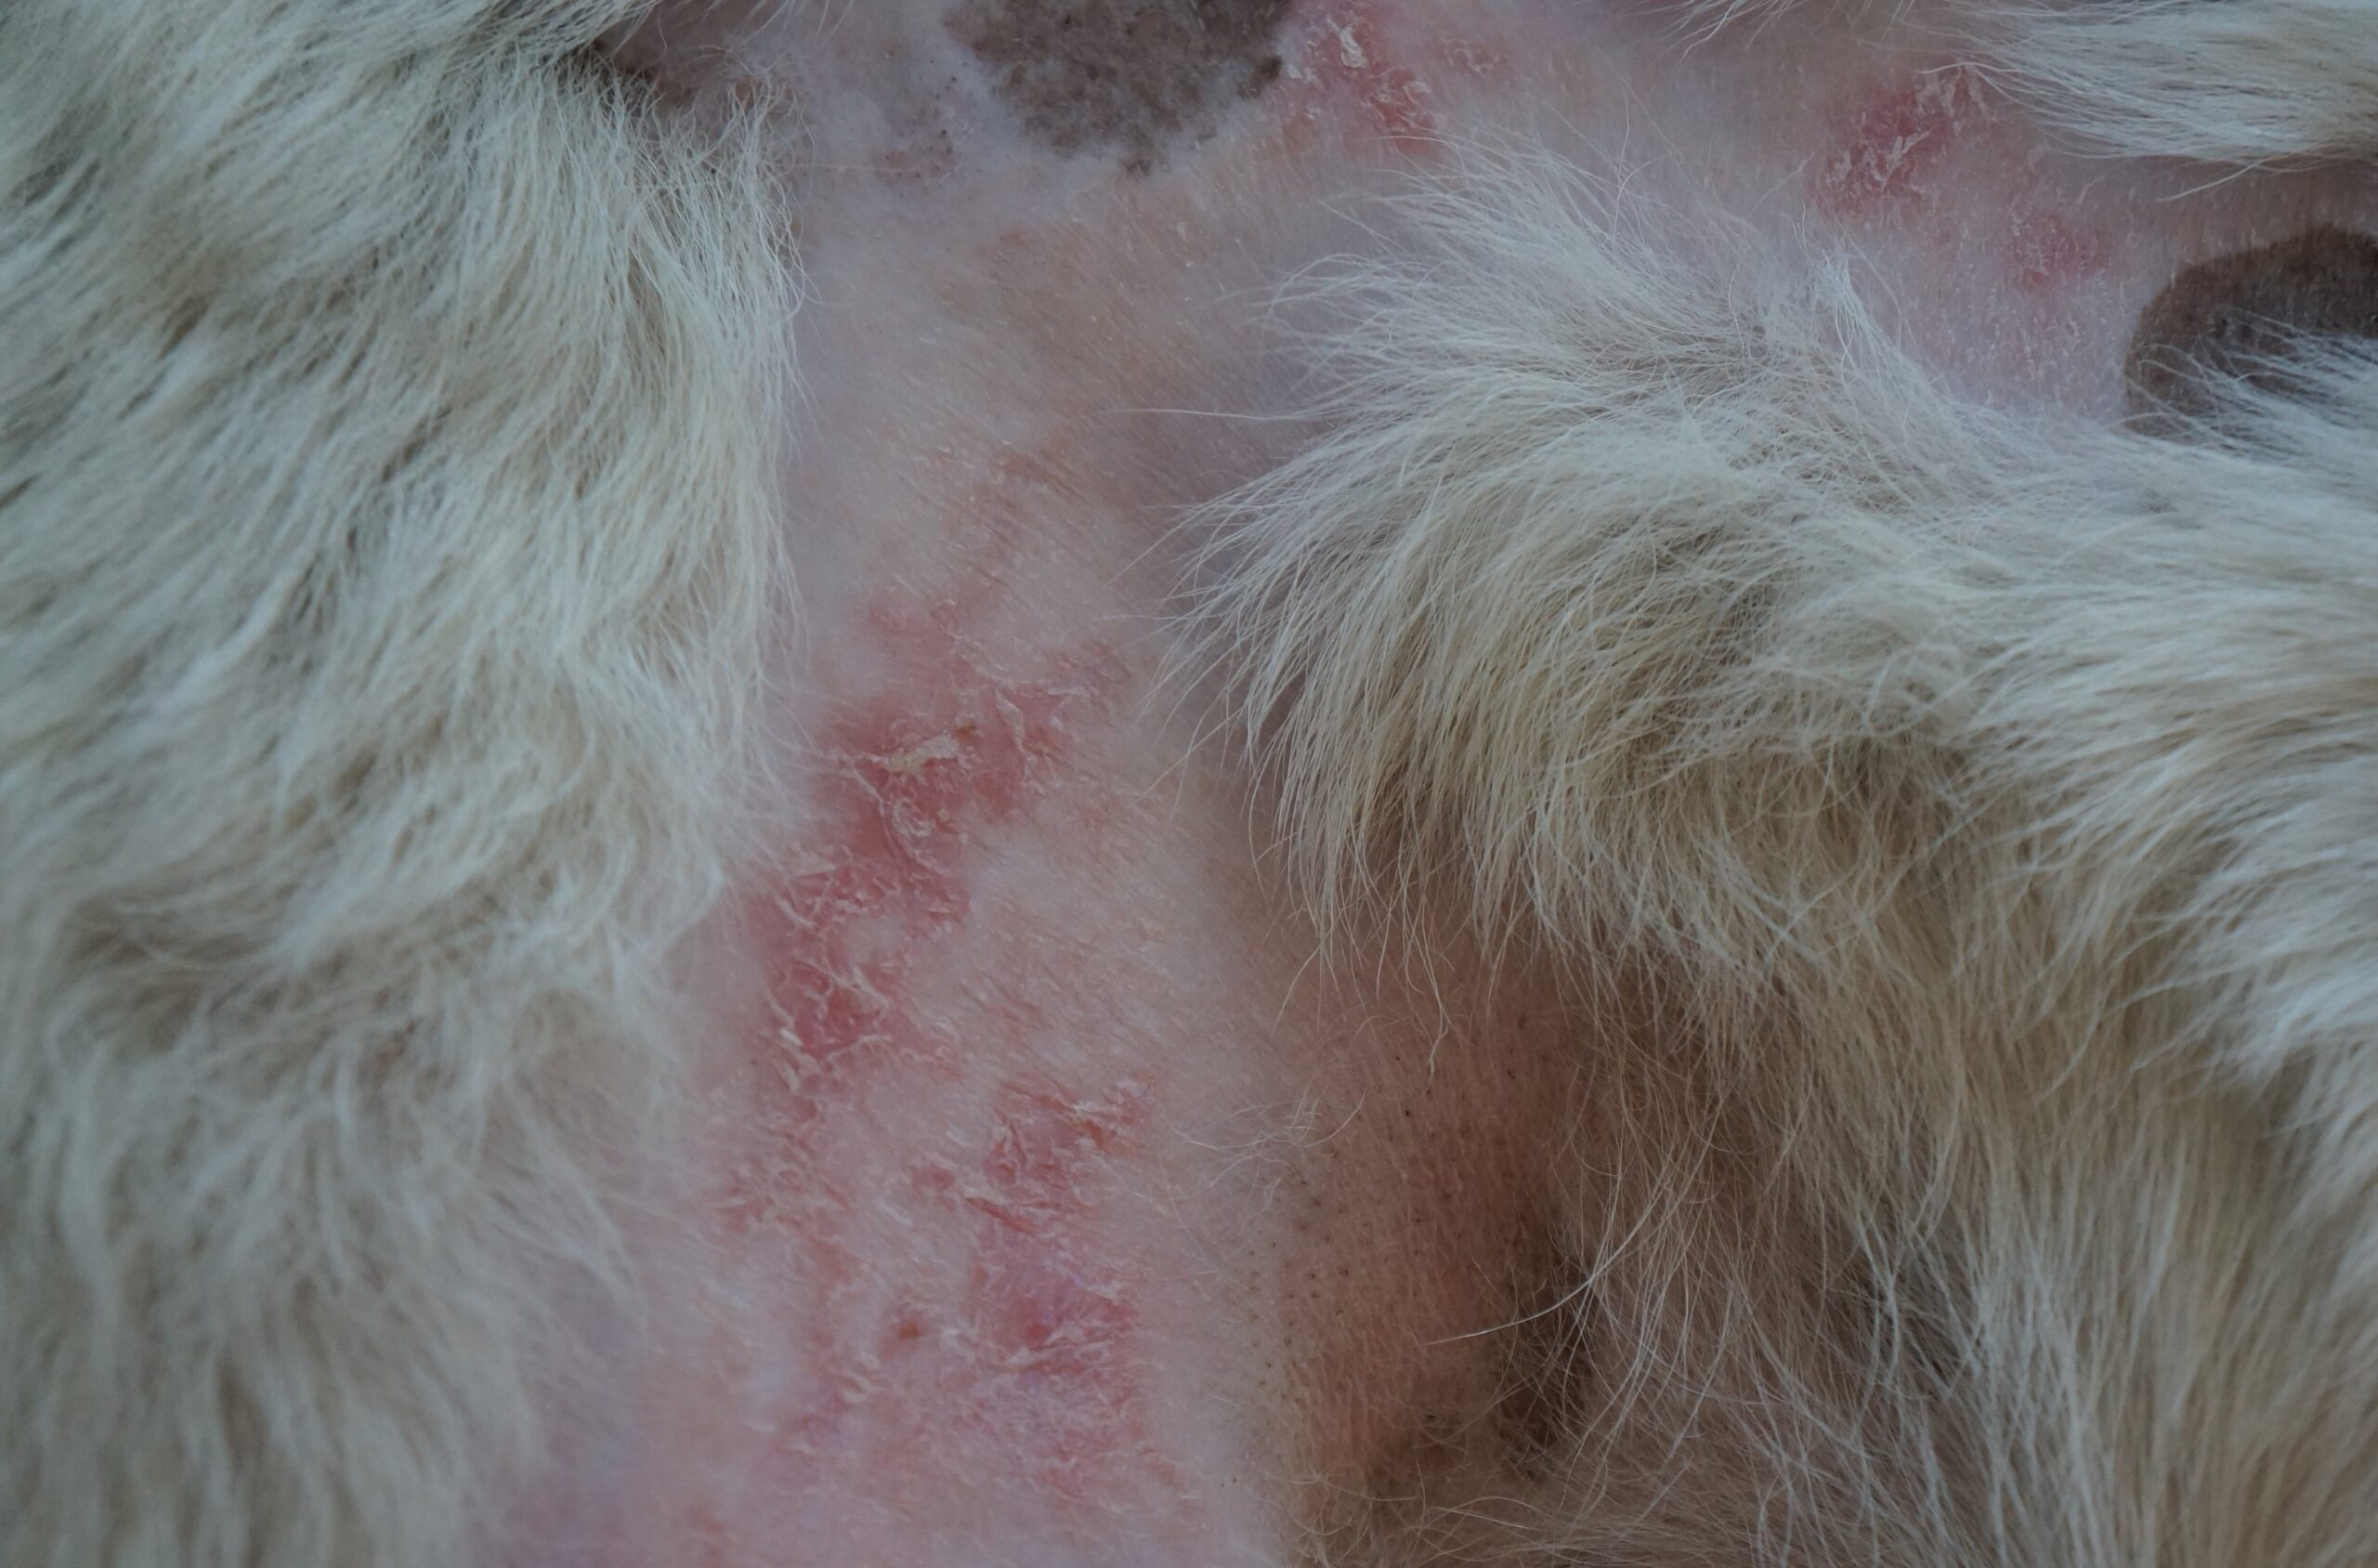 dogs with skin issues - pink skin with red / peeling areas